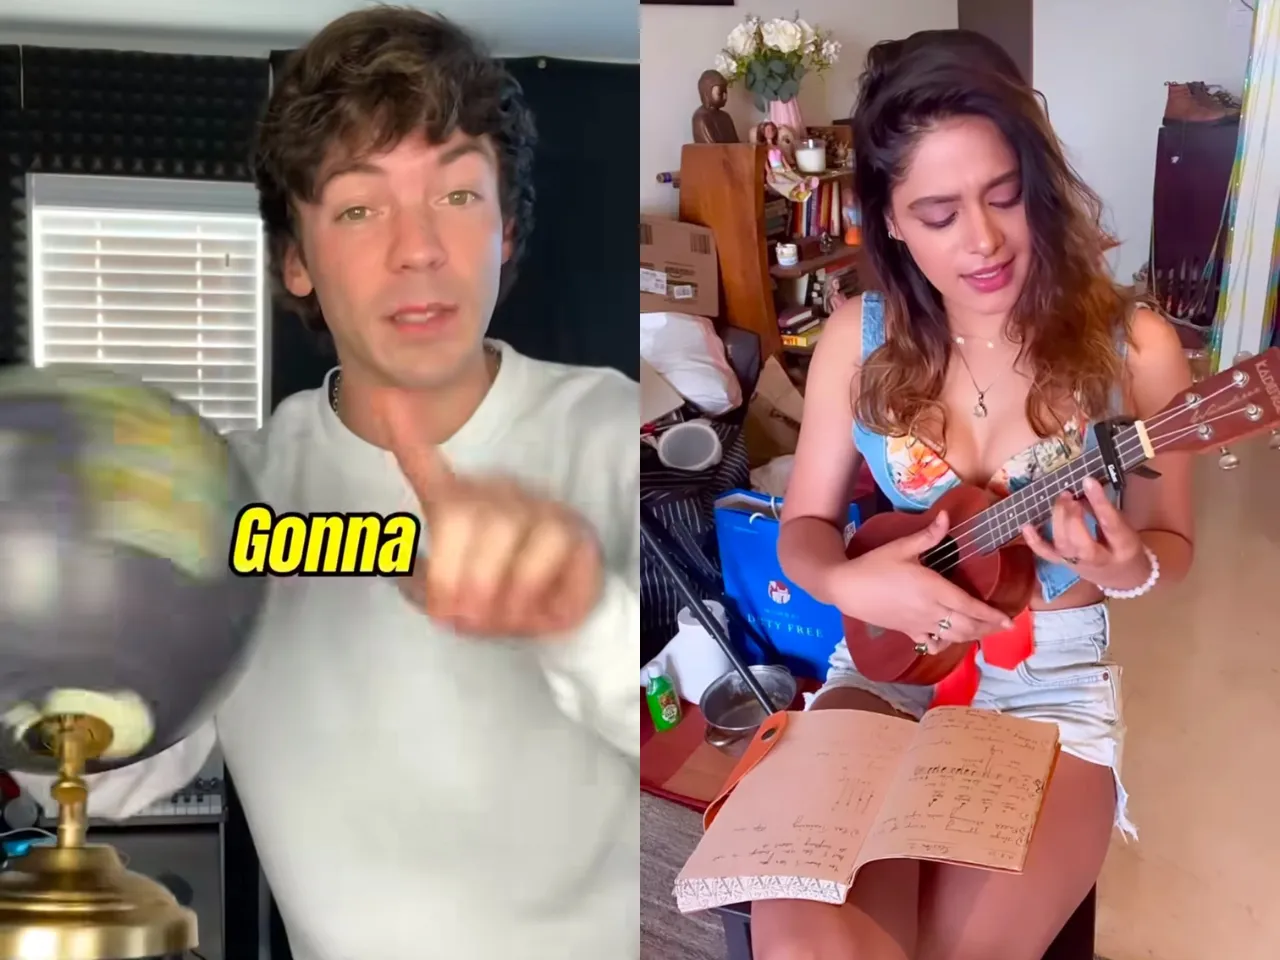 From Harsh Likhari's collab with Connor Price to Pranati Rai's self-composed song, here's every social media nitty-gritty